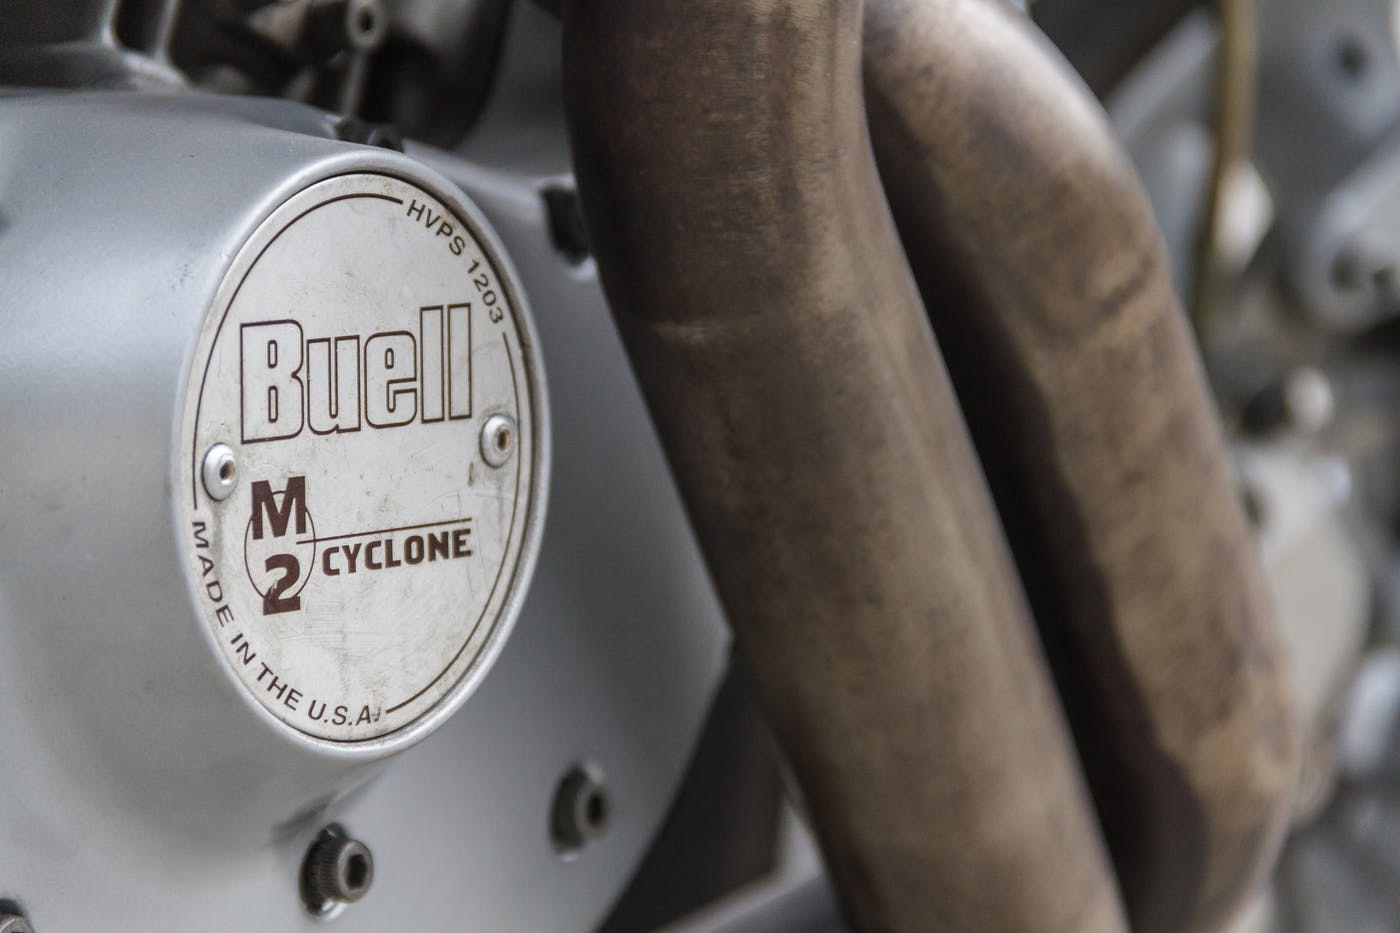 Buell m2 Cyclone by Greaser Garage